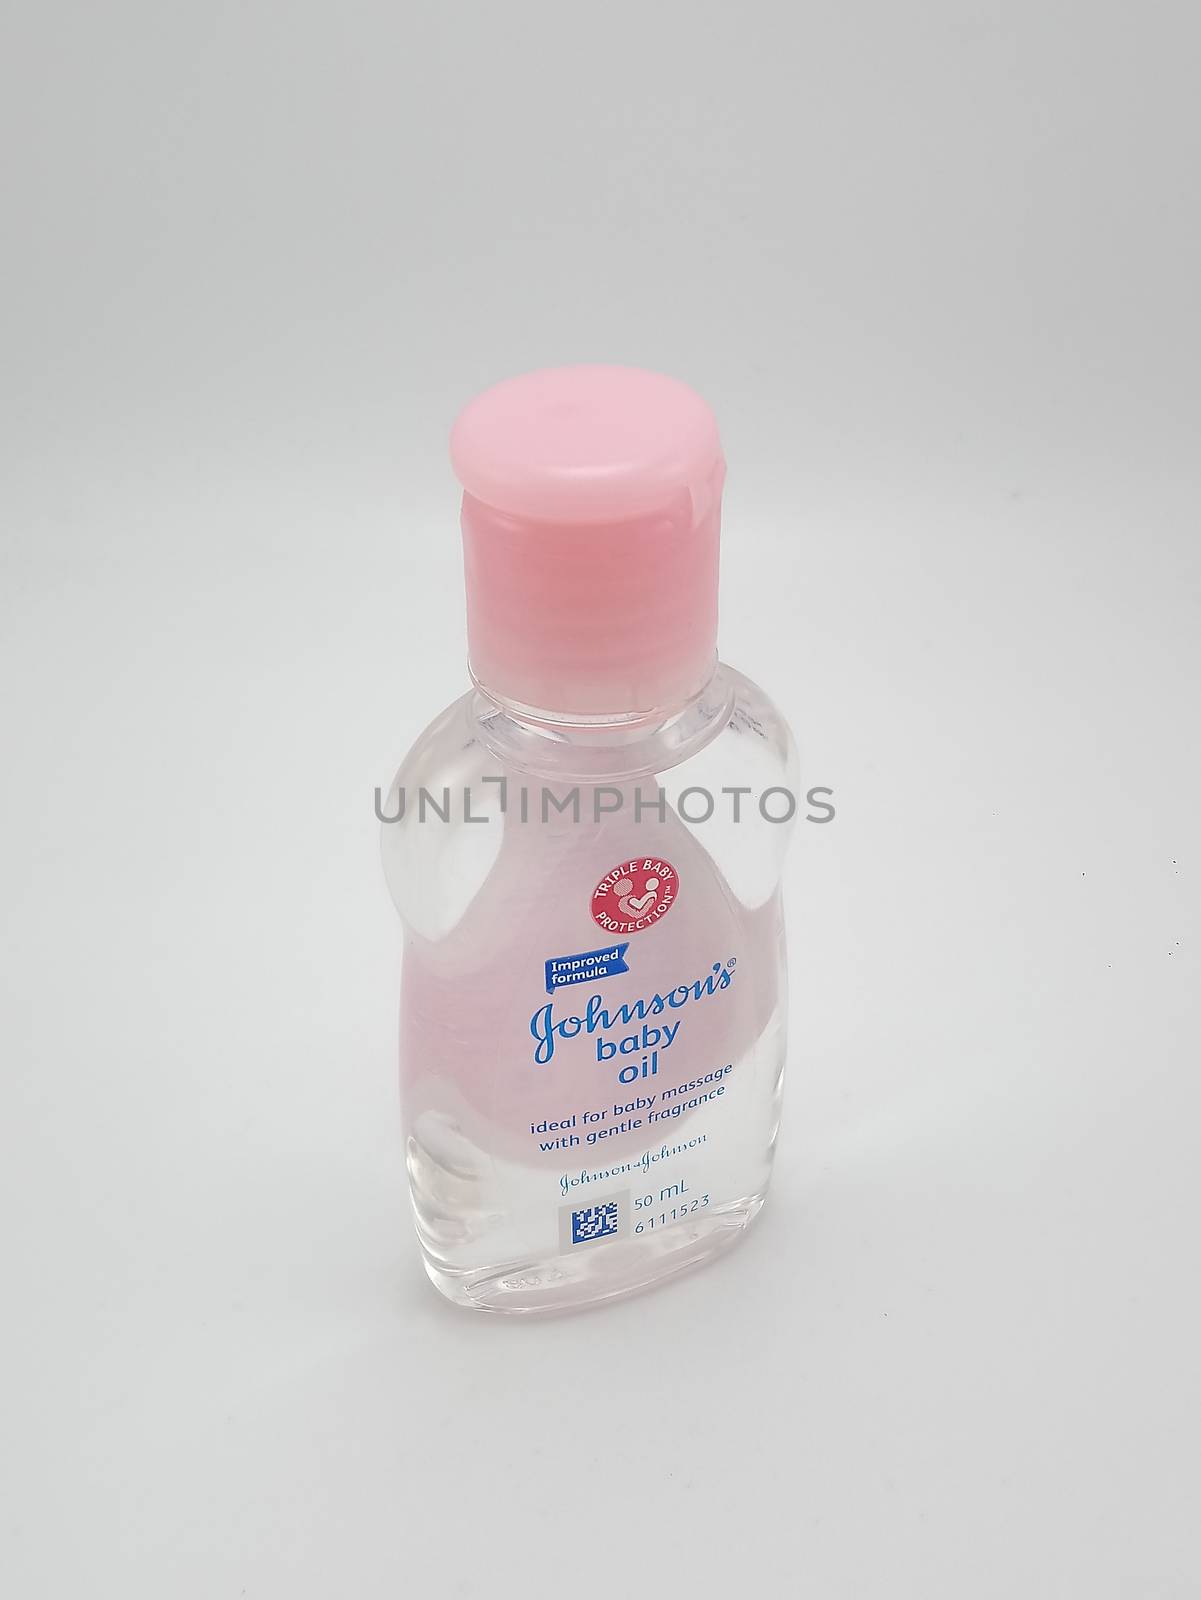 Johnsons baby oil in Manila, Philippines by imwaltersy